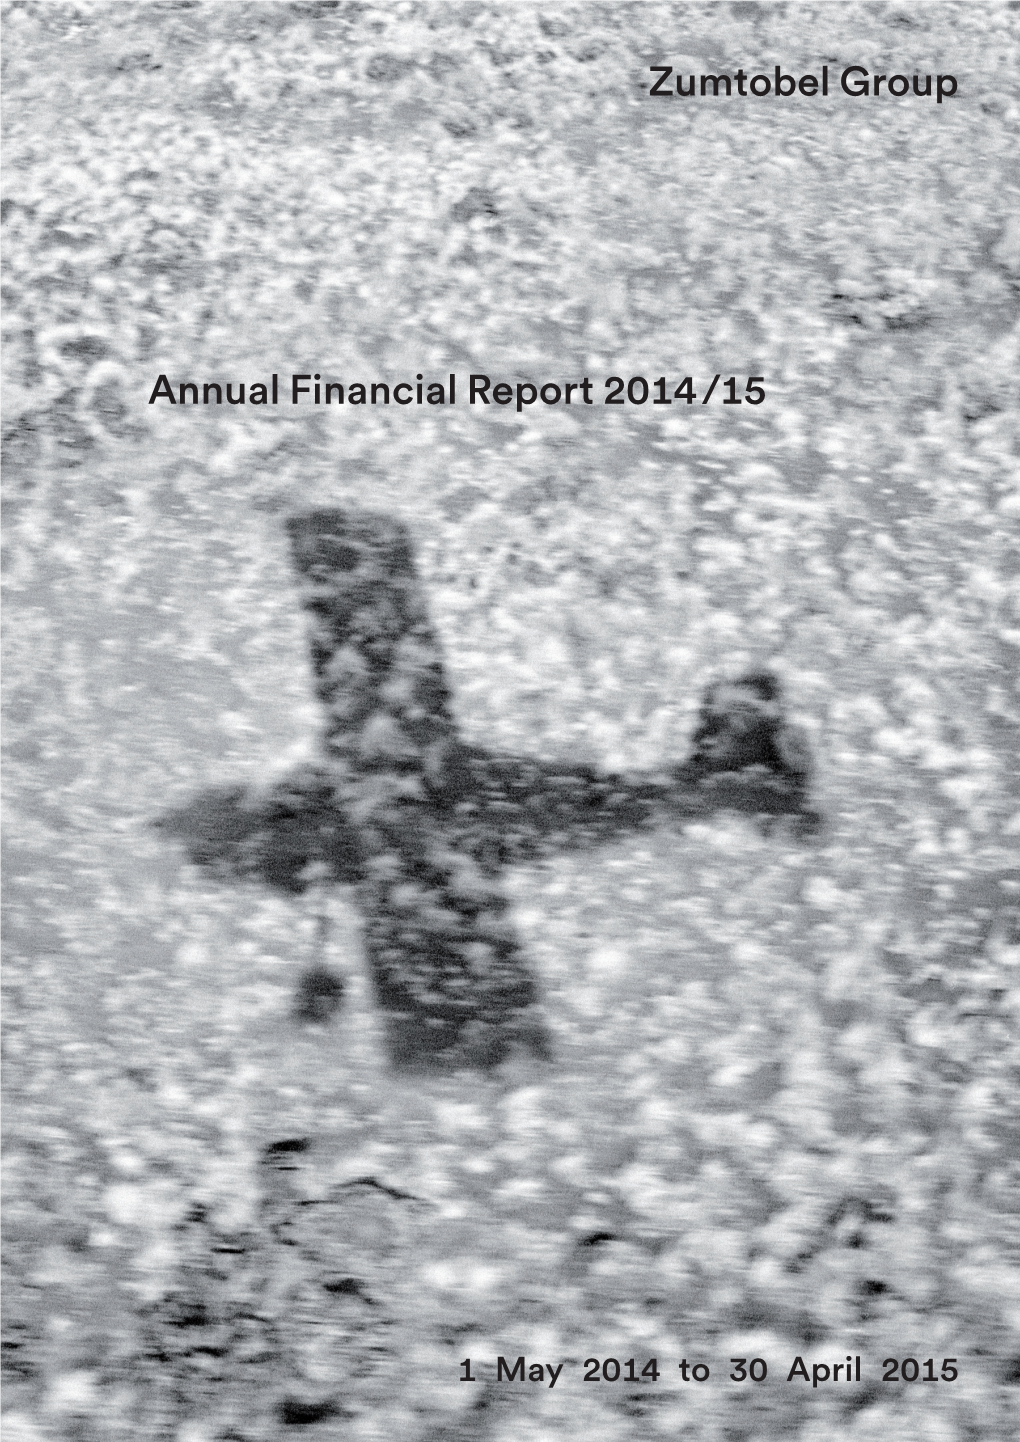 Annual Financial Report 2014/15